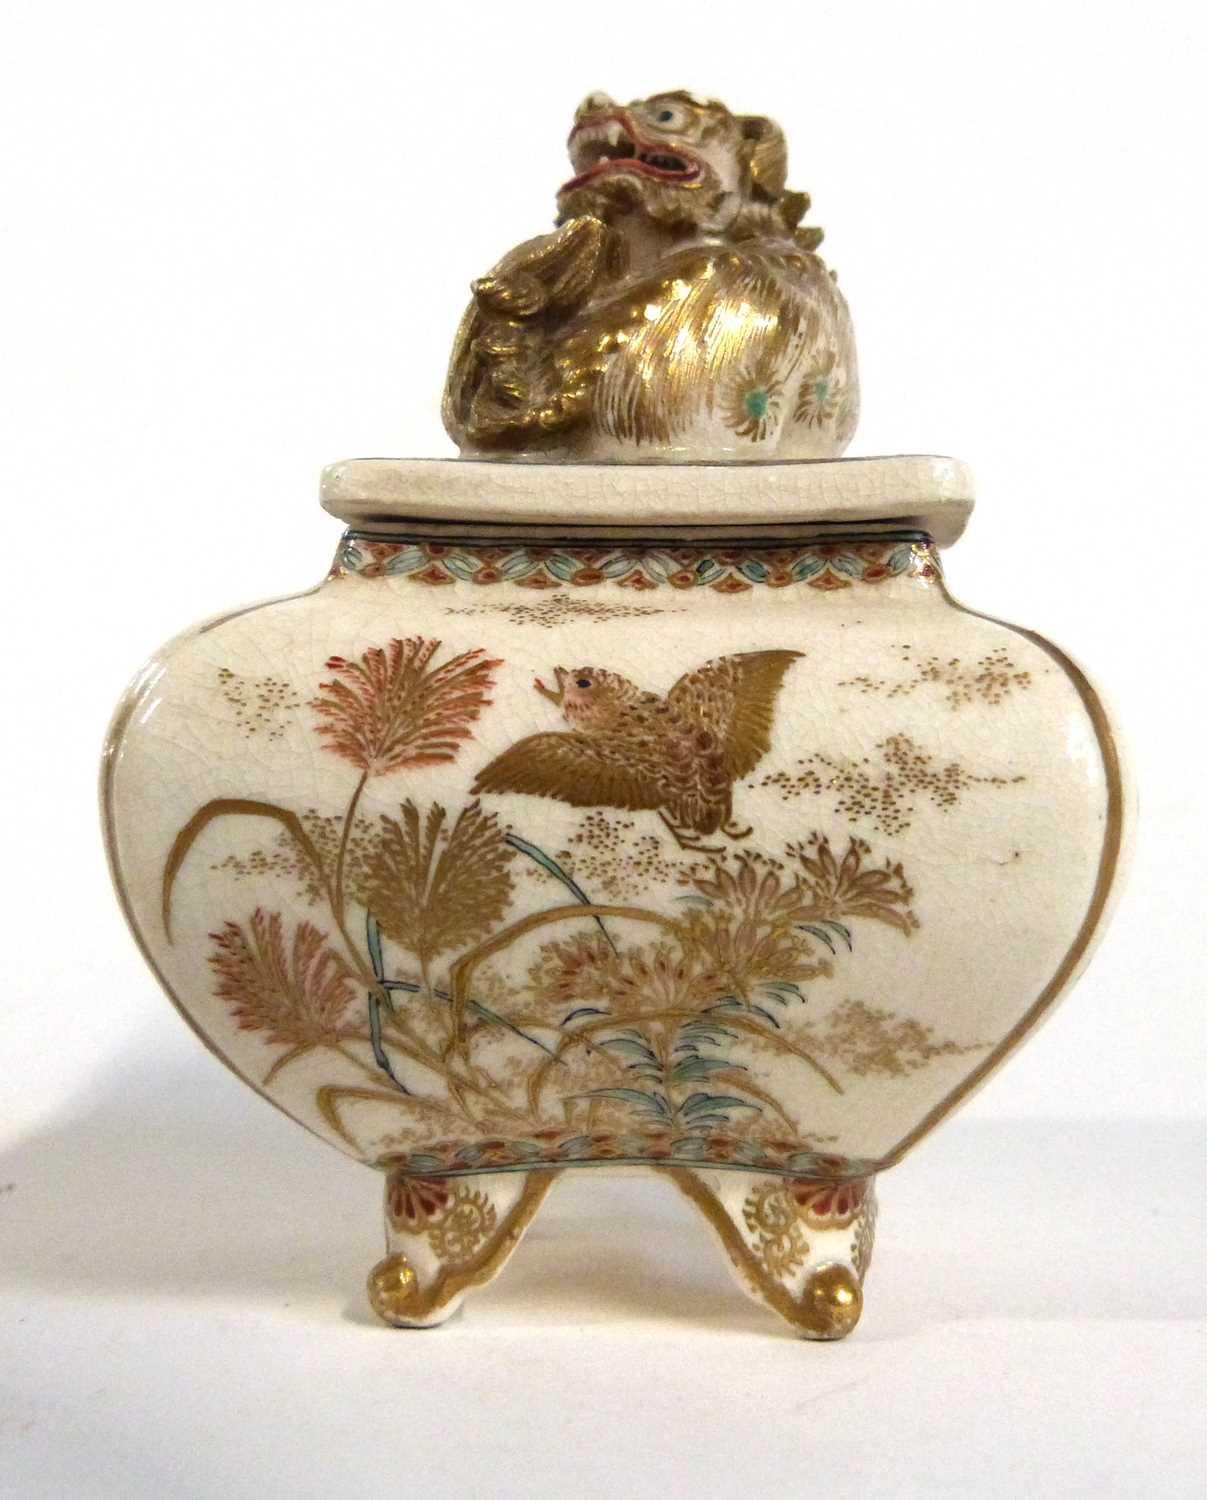 Japanese Satsuma small jar of quatrelobe form, the cover decorated with a dragon finial - Image 2 of 8